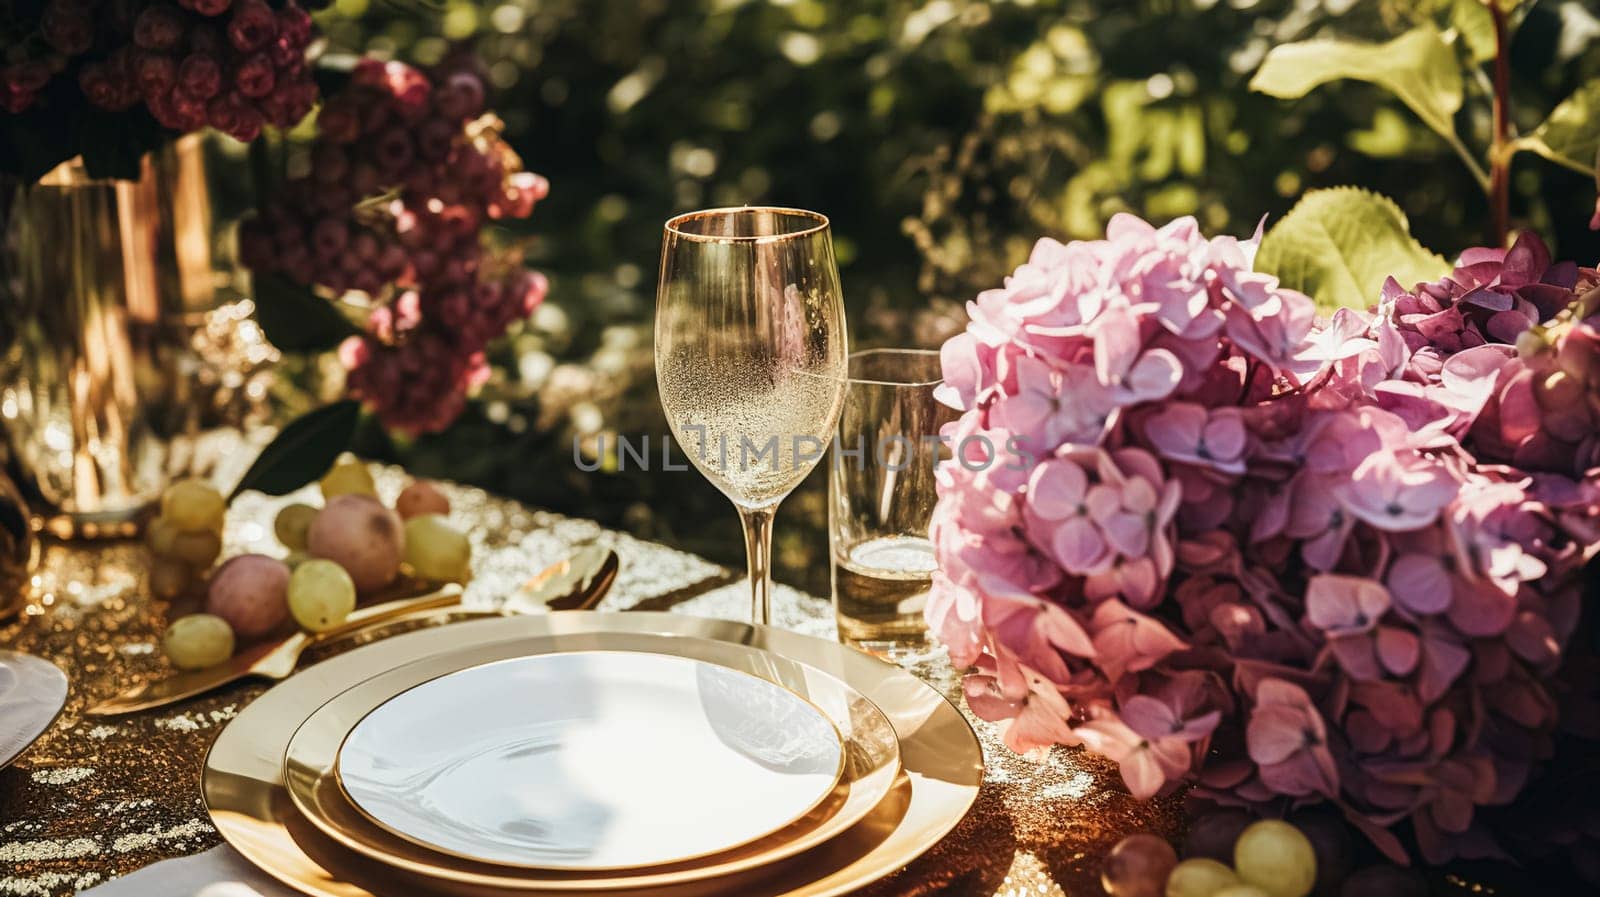 Wedding or formal dinner holiday celebration tablescape with hydrangea flowers in the English countryside garden, table setting and wine, floral table decor for family dinner party, home styling inspiration